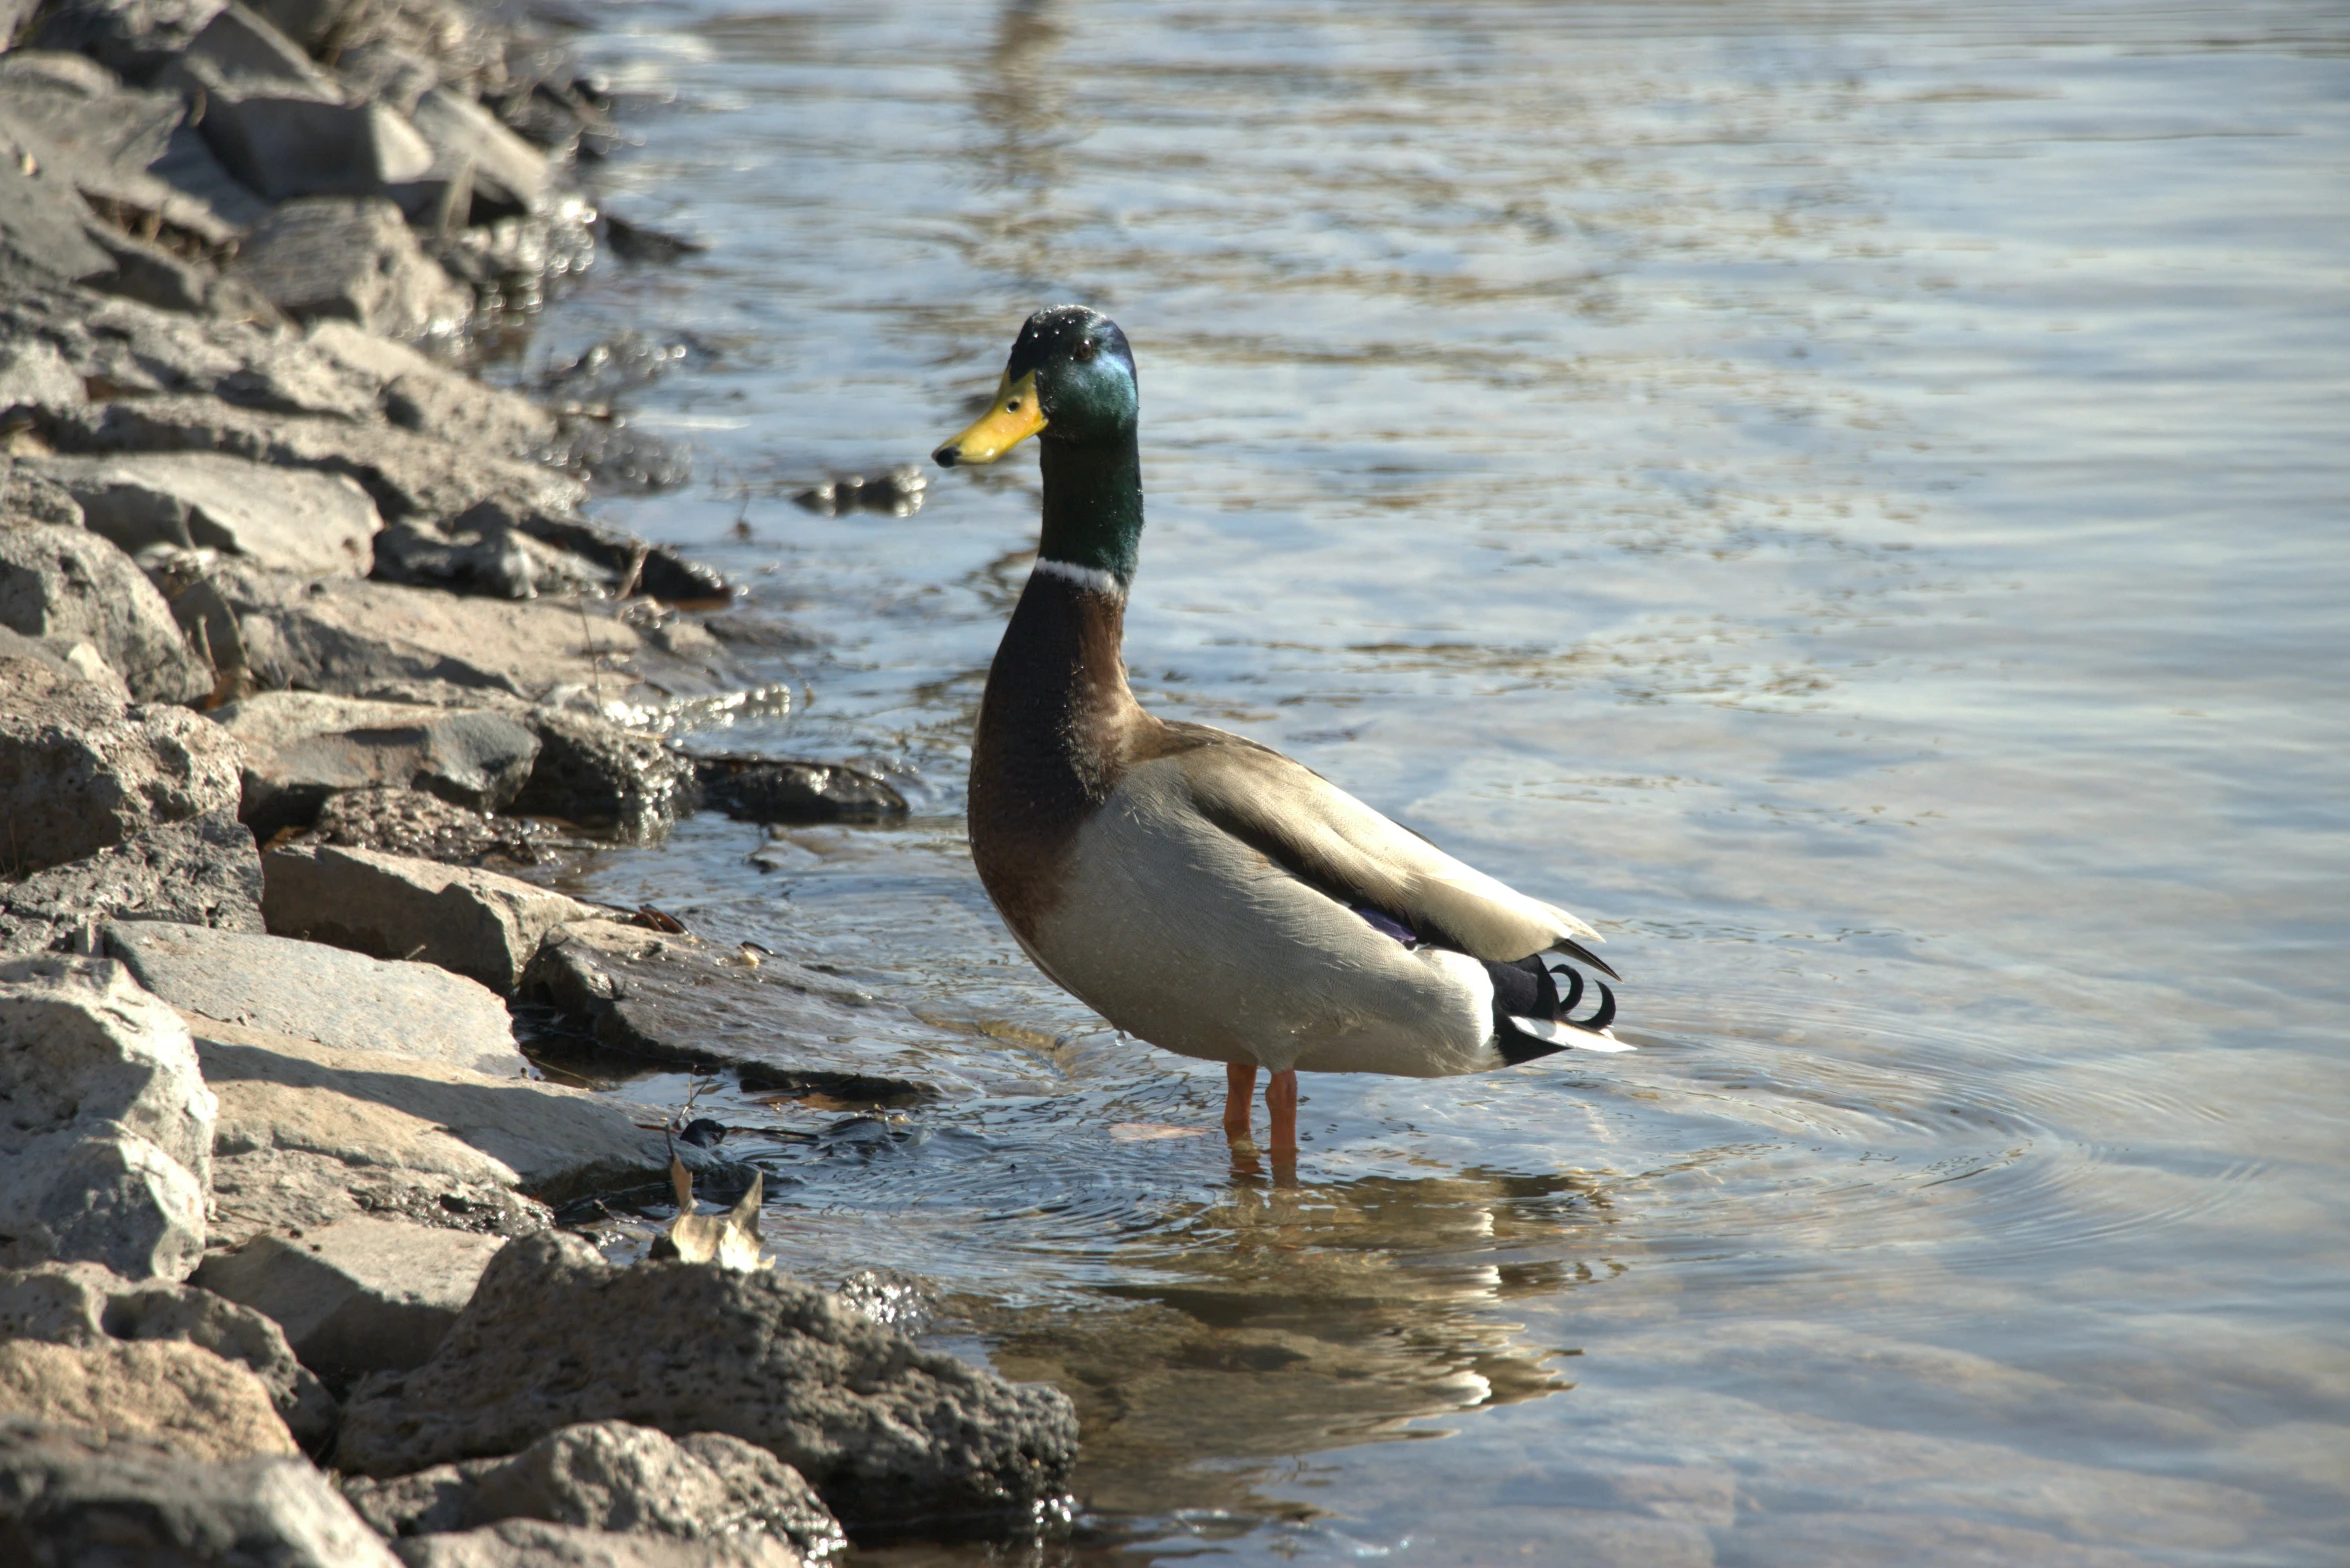 two ducks are in the water by rocks